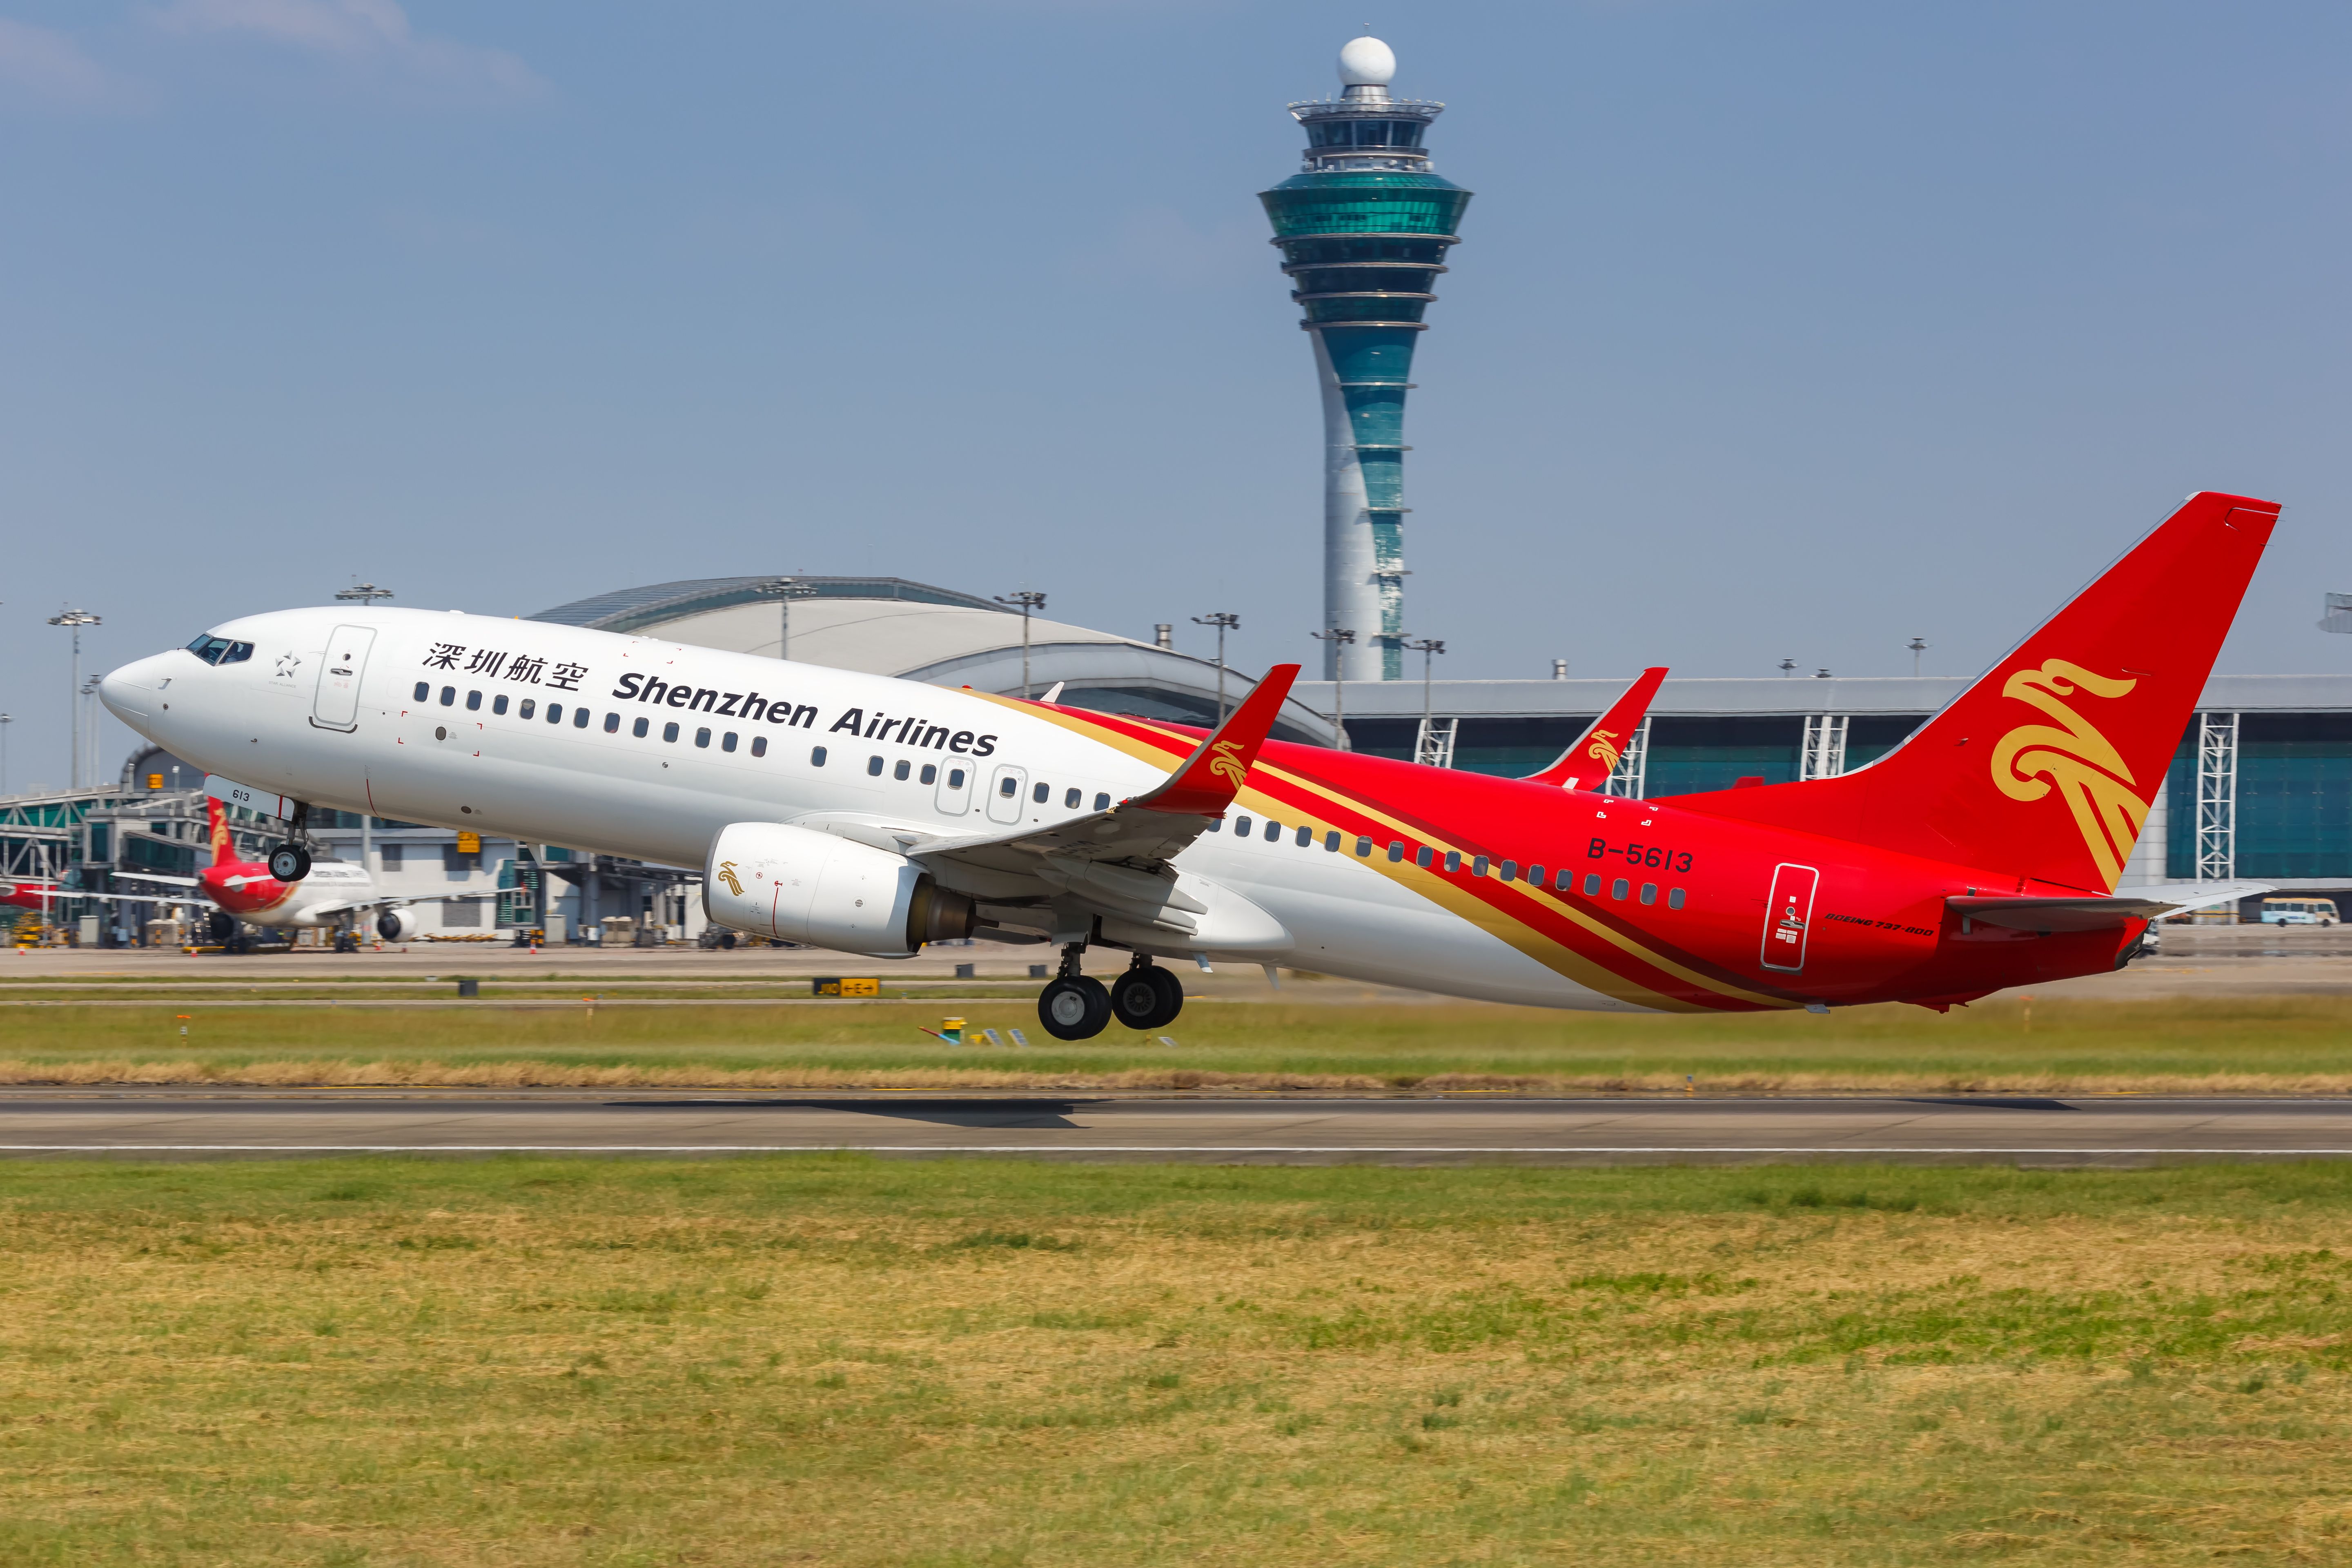 A Shenzhen Airlines Boeing 737 taking off.